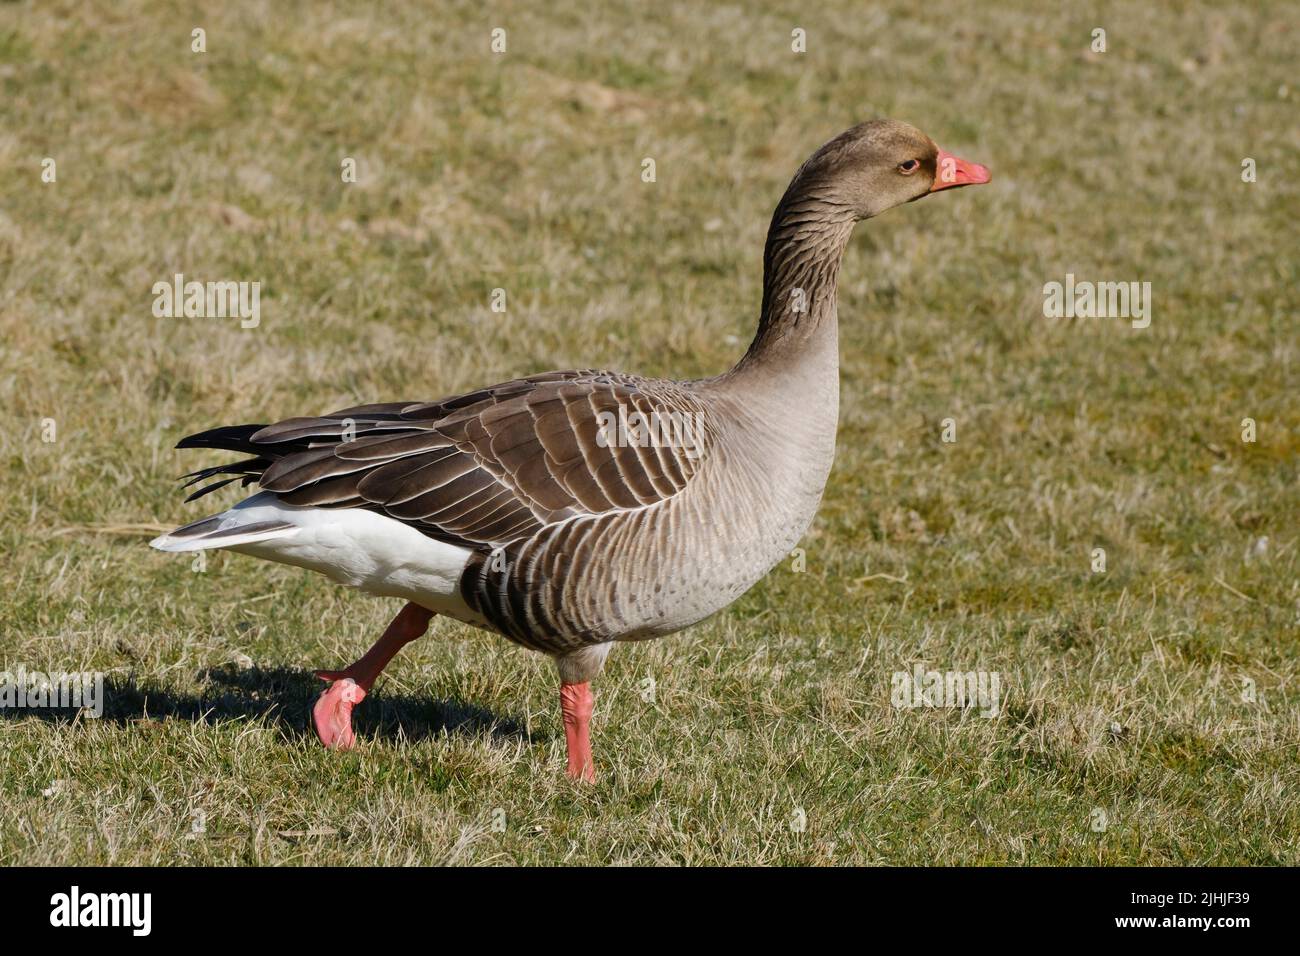 Greylag goose on a field Stock Photo